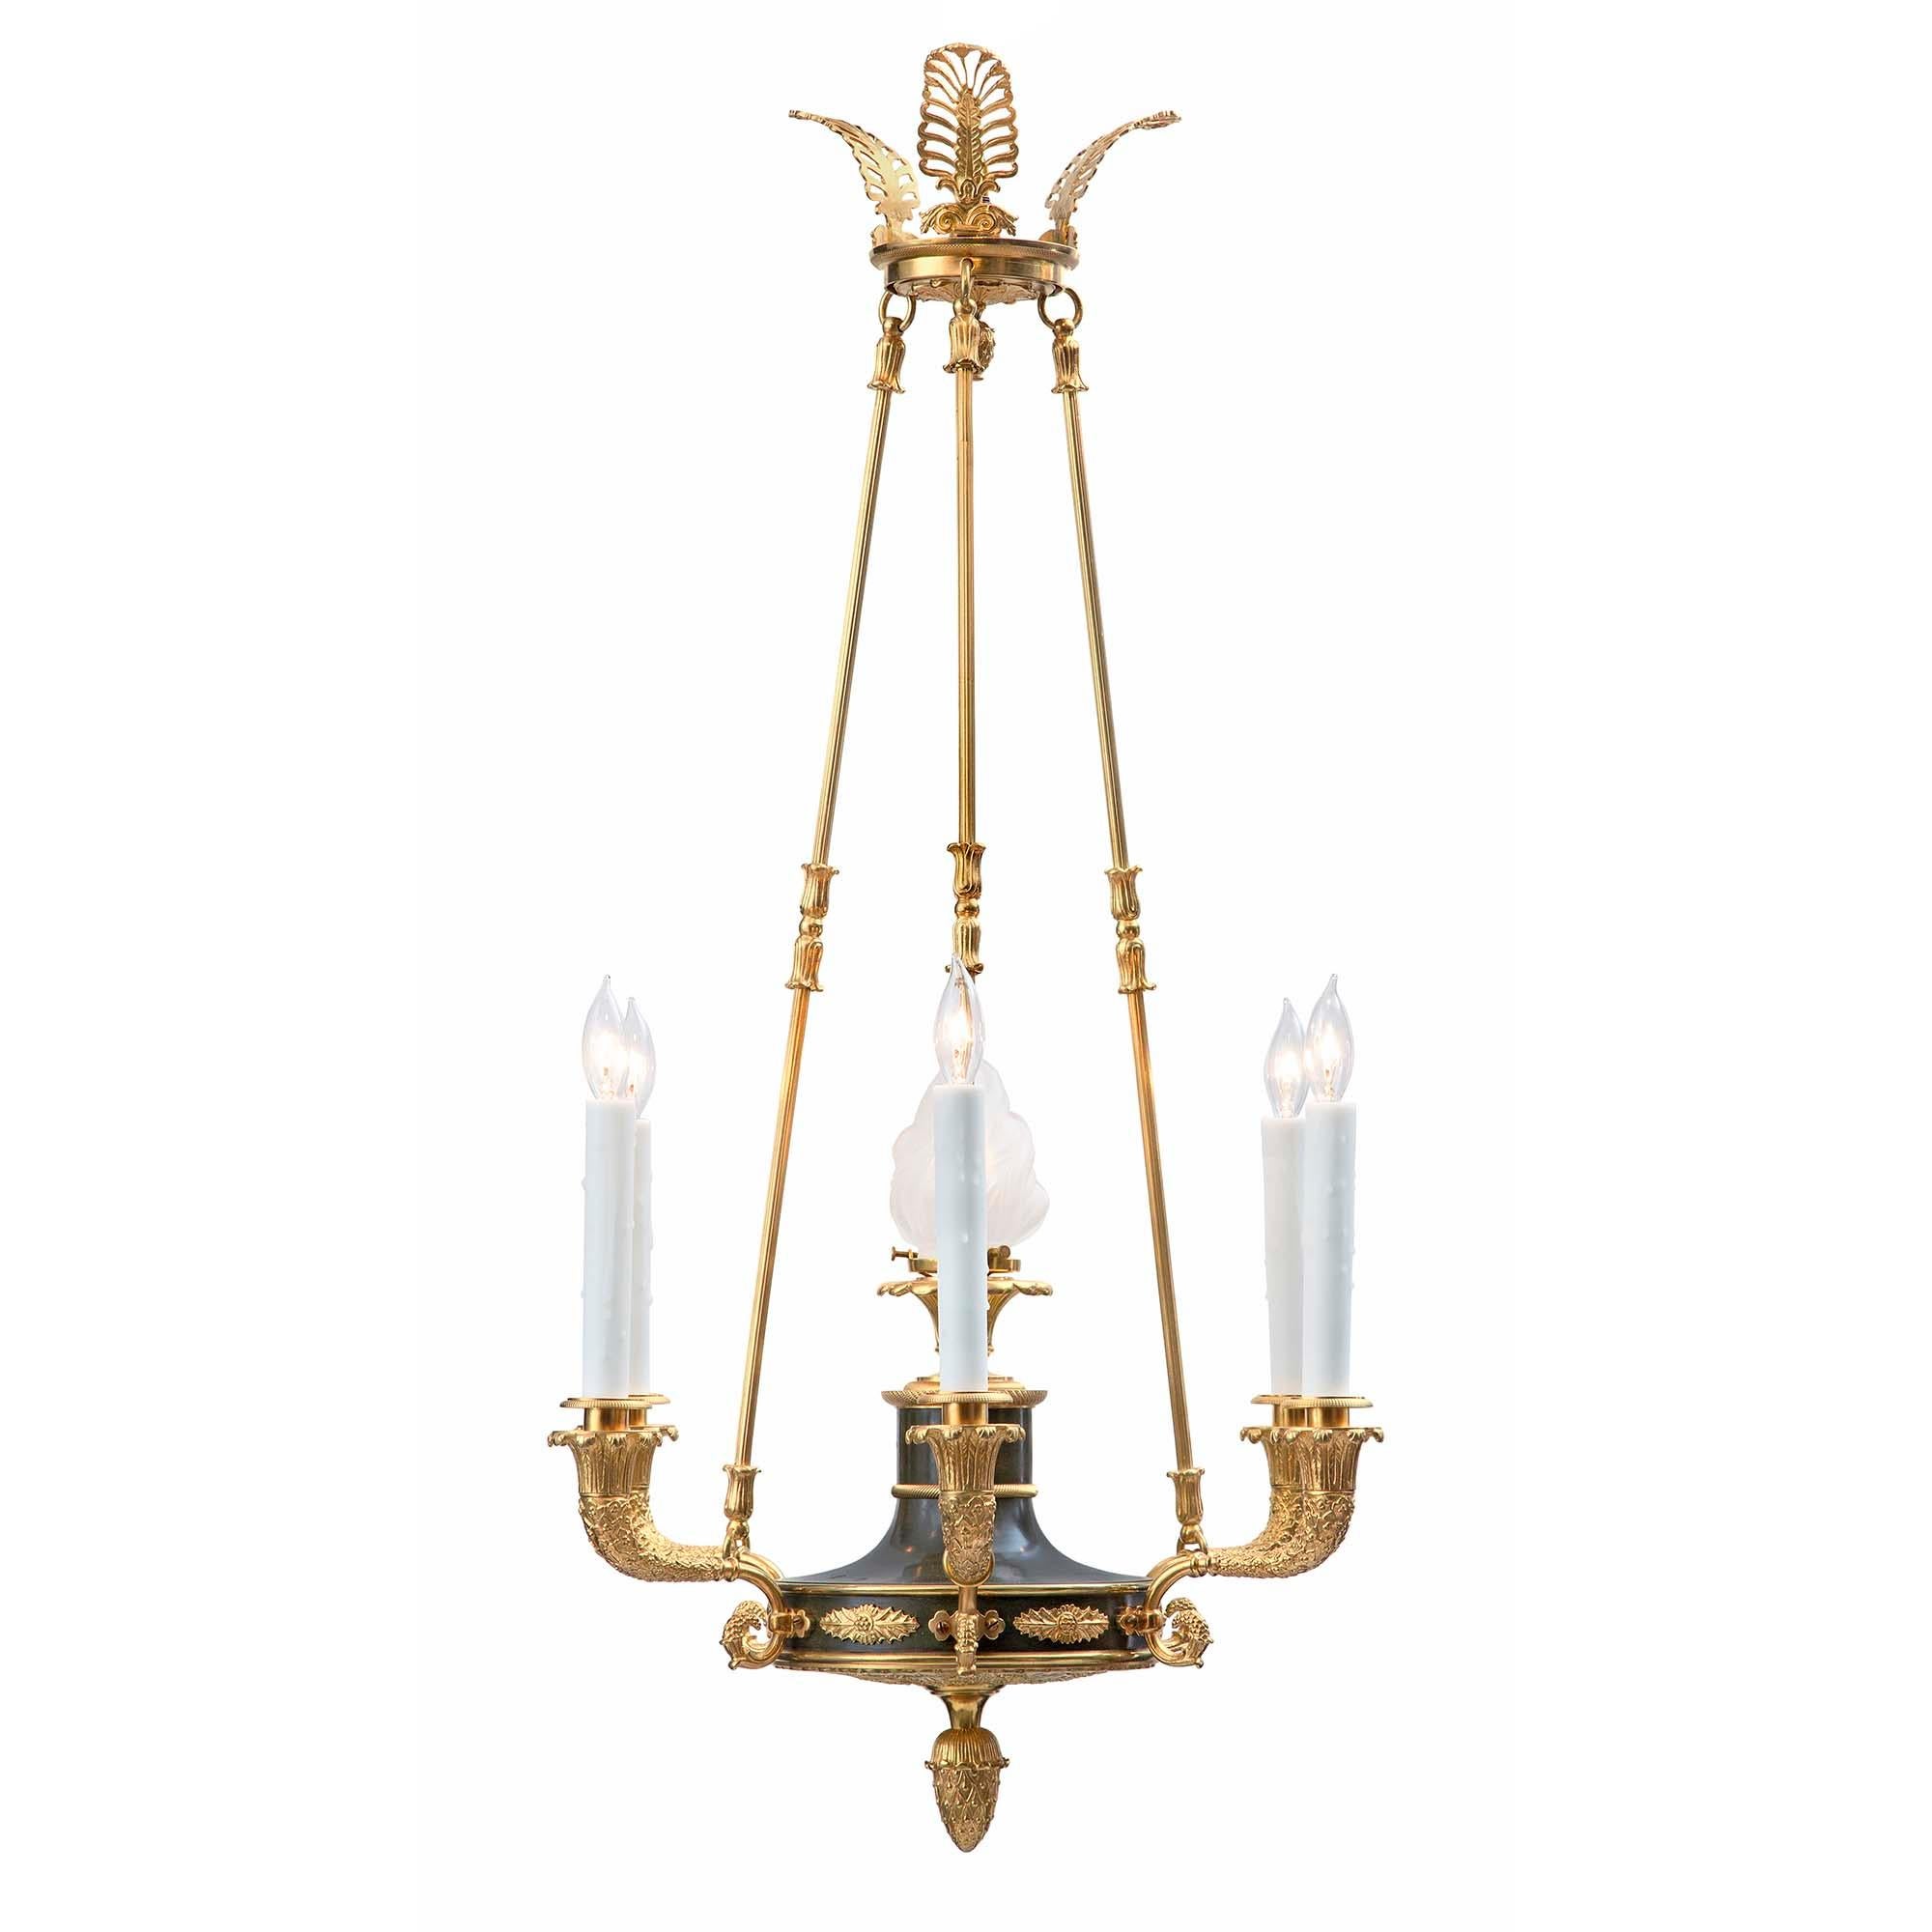 A handsome French 19th century Empire st. patinated bronze and ormolu seven light chandelier. The chandelier is centered by a fine ormolu acorn inverted finial below a richly chased base with most decorative foliate patterns in a striking satin and